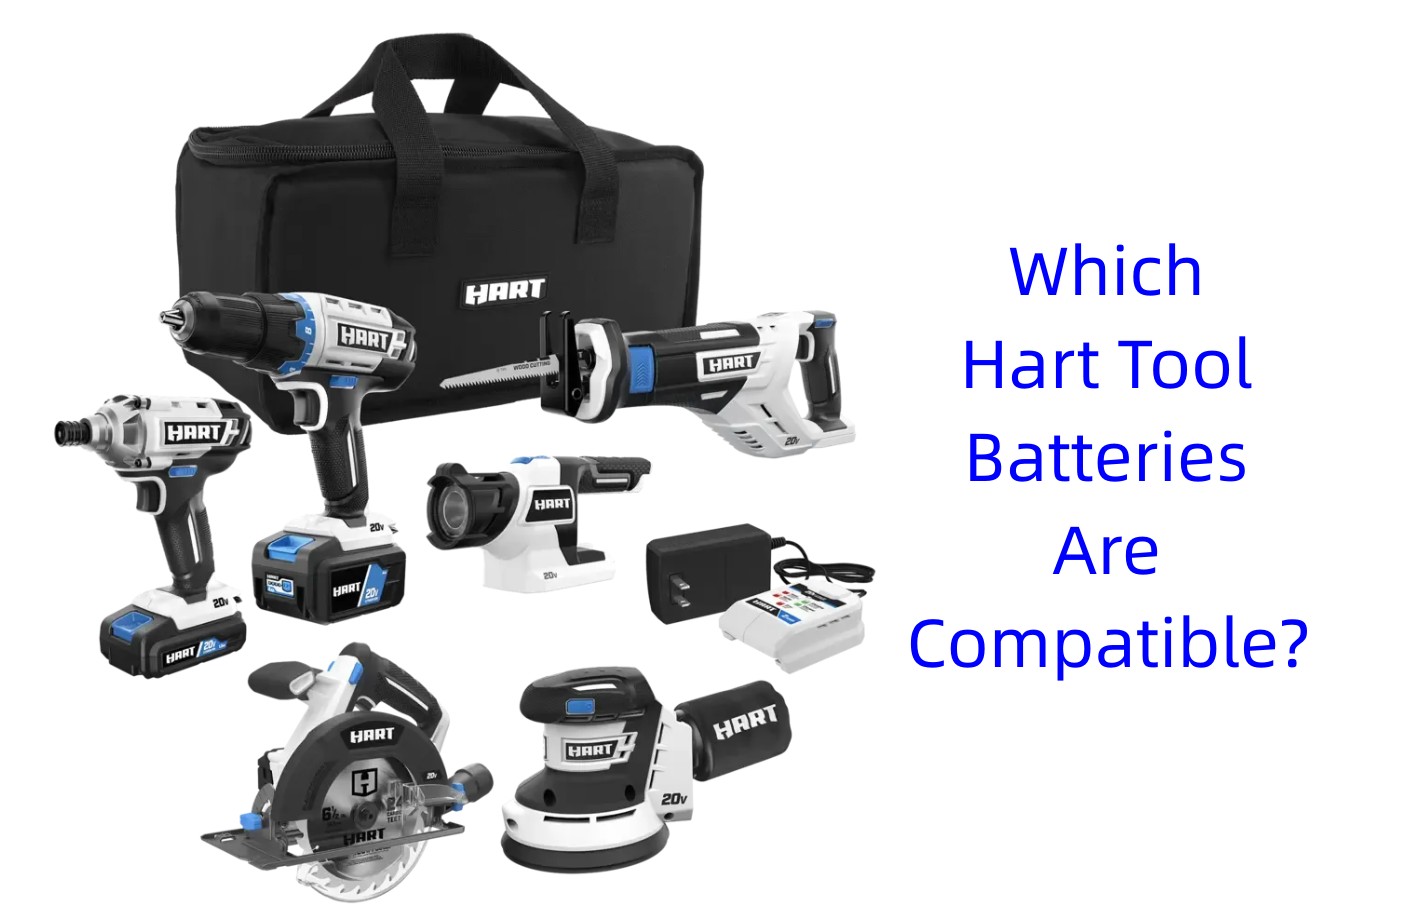 Exploring Interchangeability: Which Hart Tool Batteries Are Compatible?